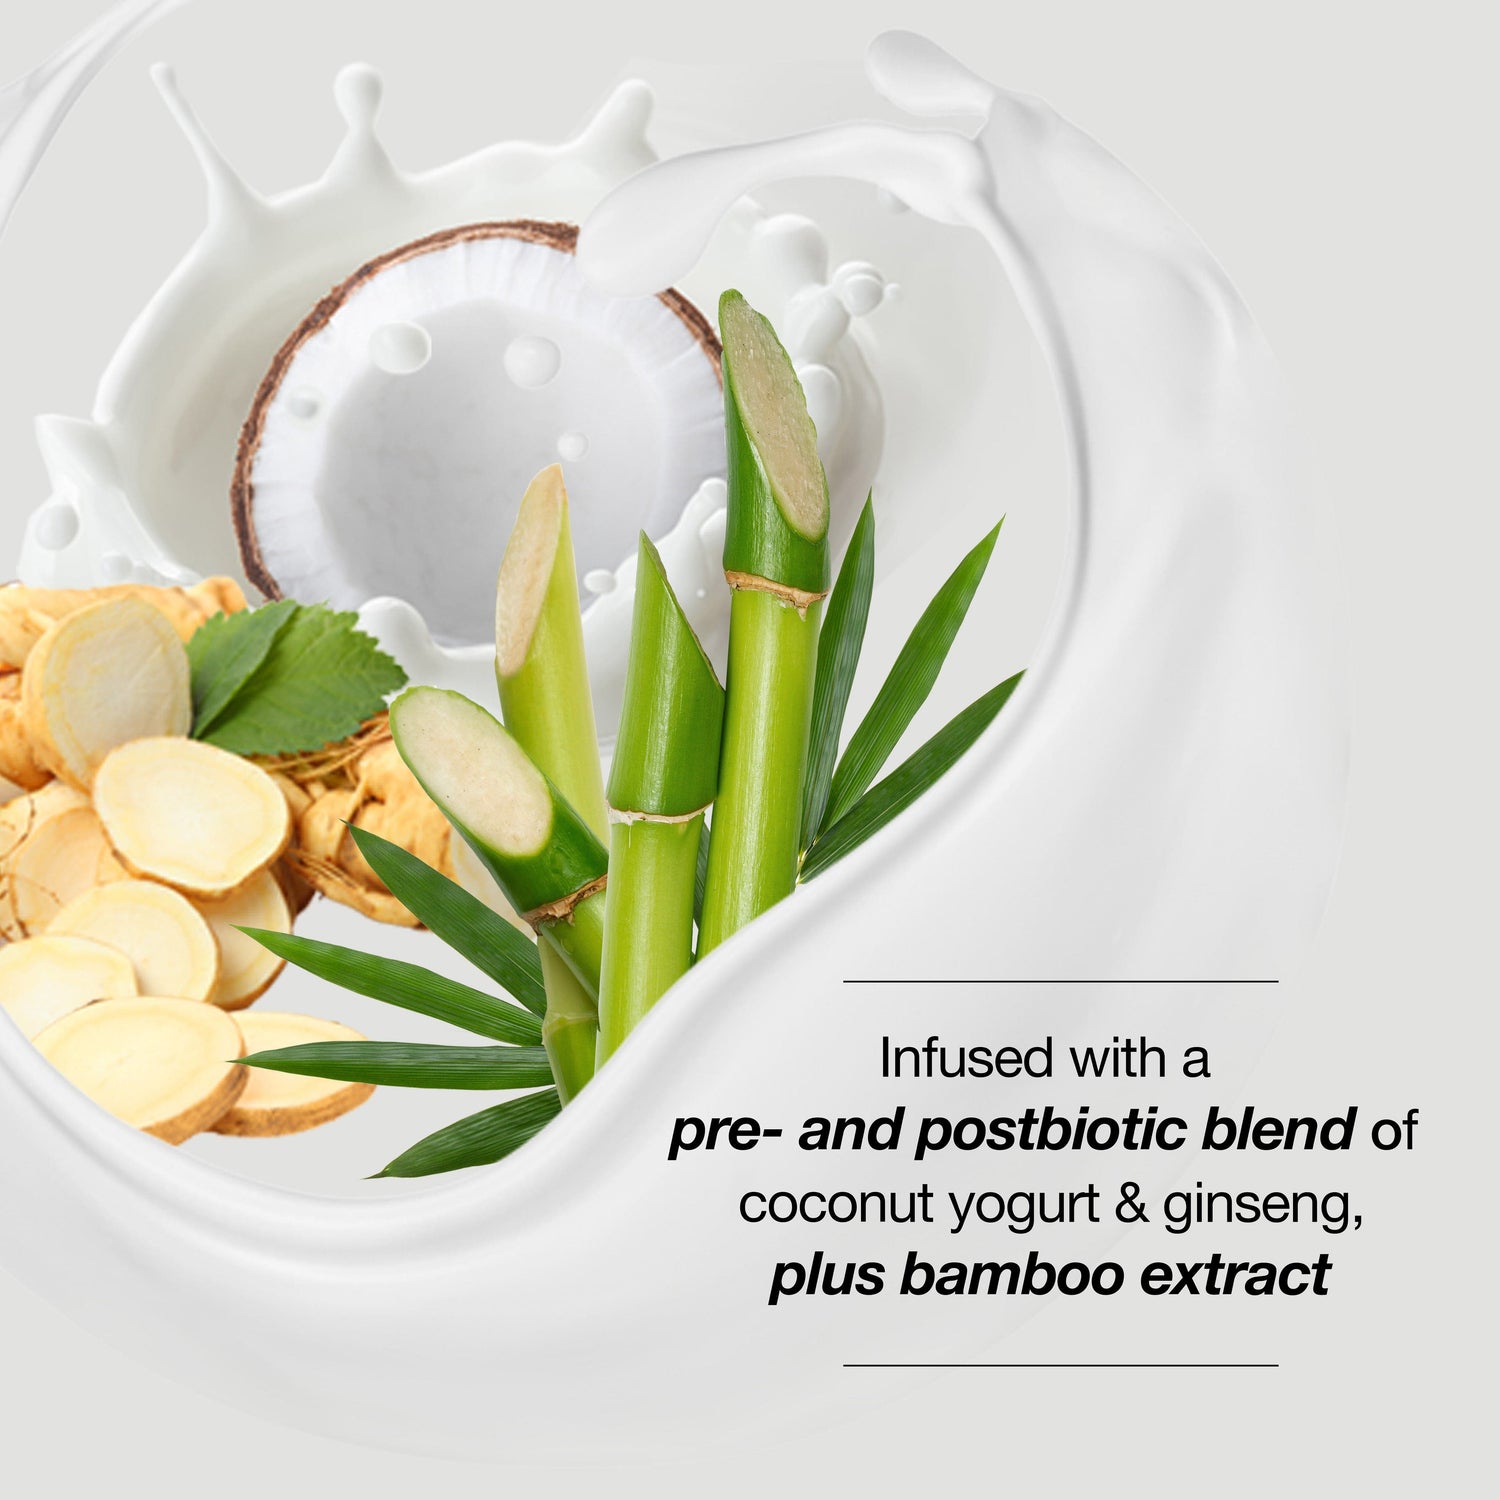 Biotera is infused with a pre and post biotic blend of coconut yogurt and ginseng plus bamboo extract